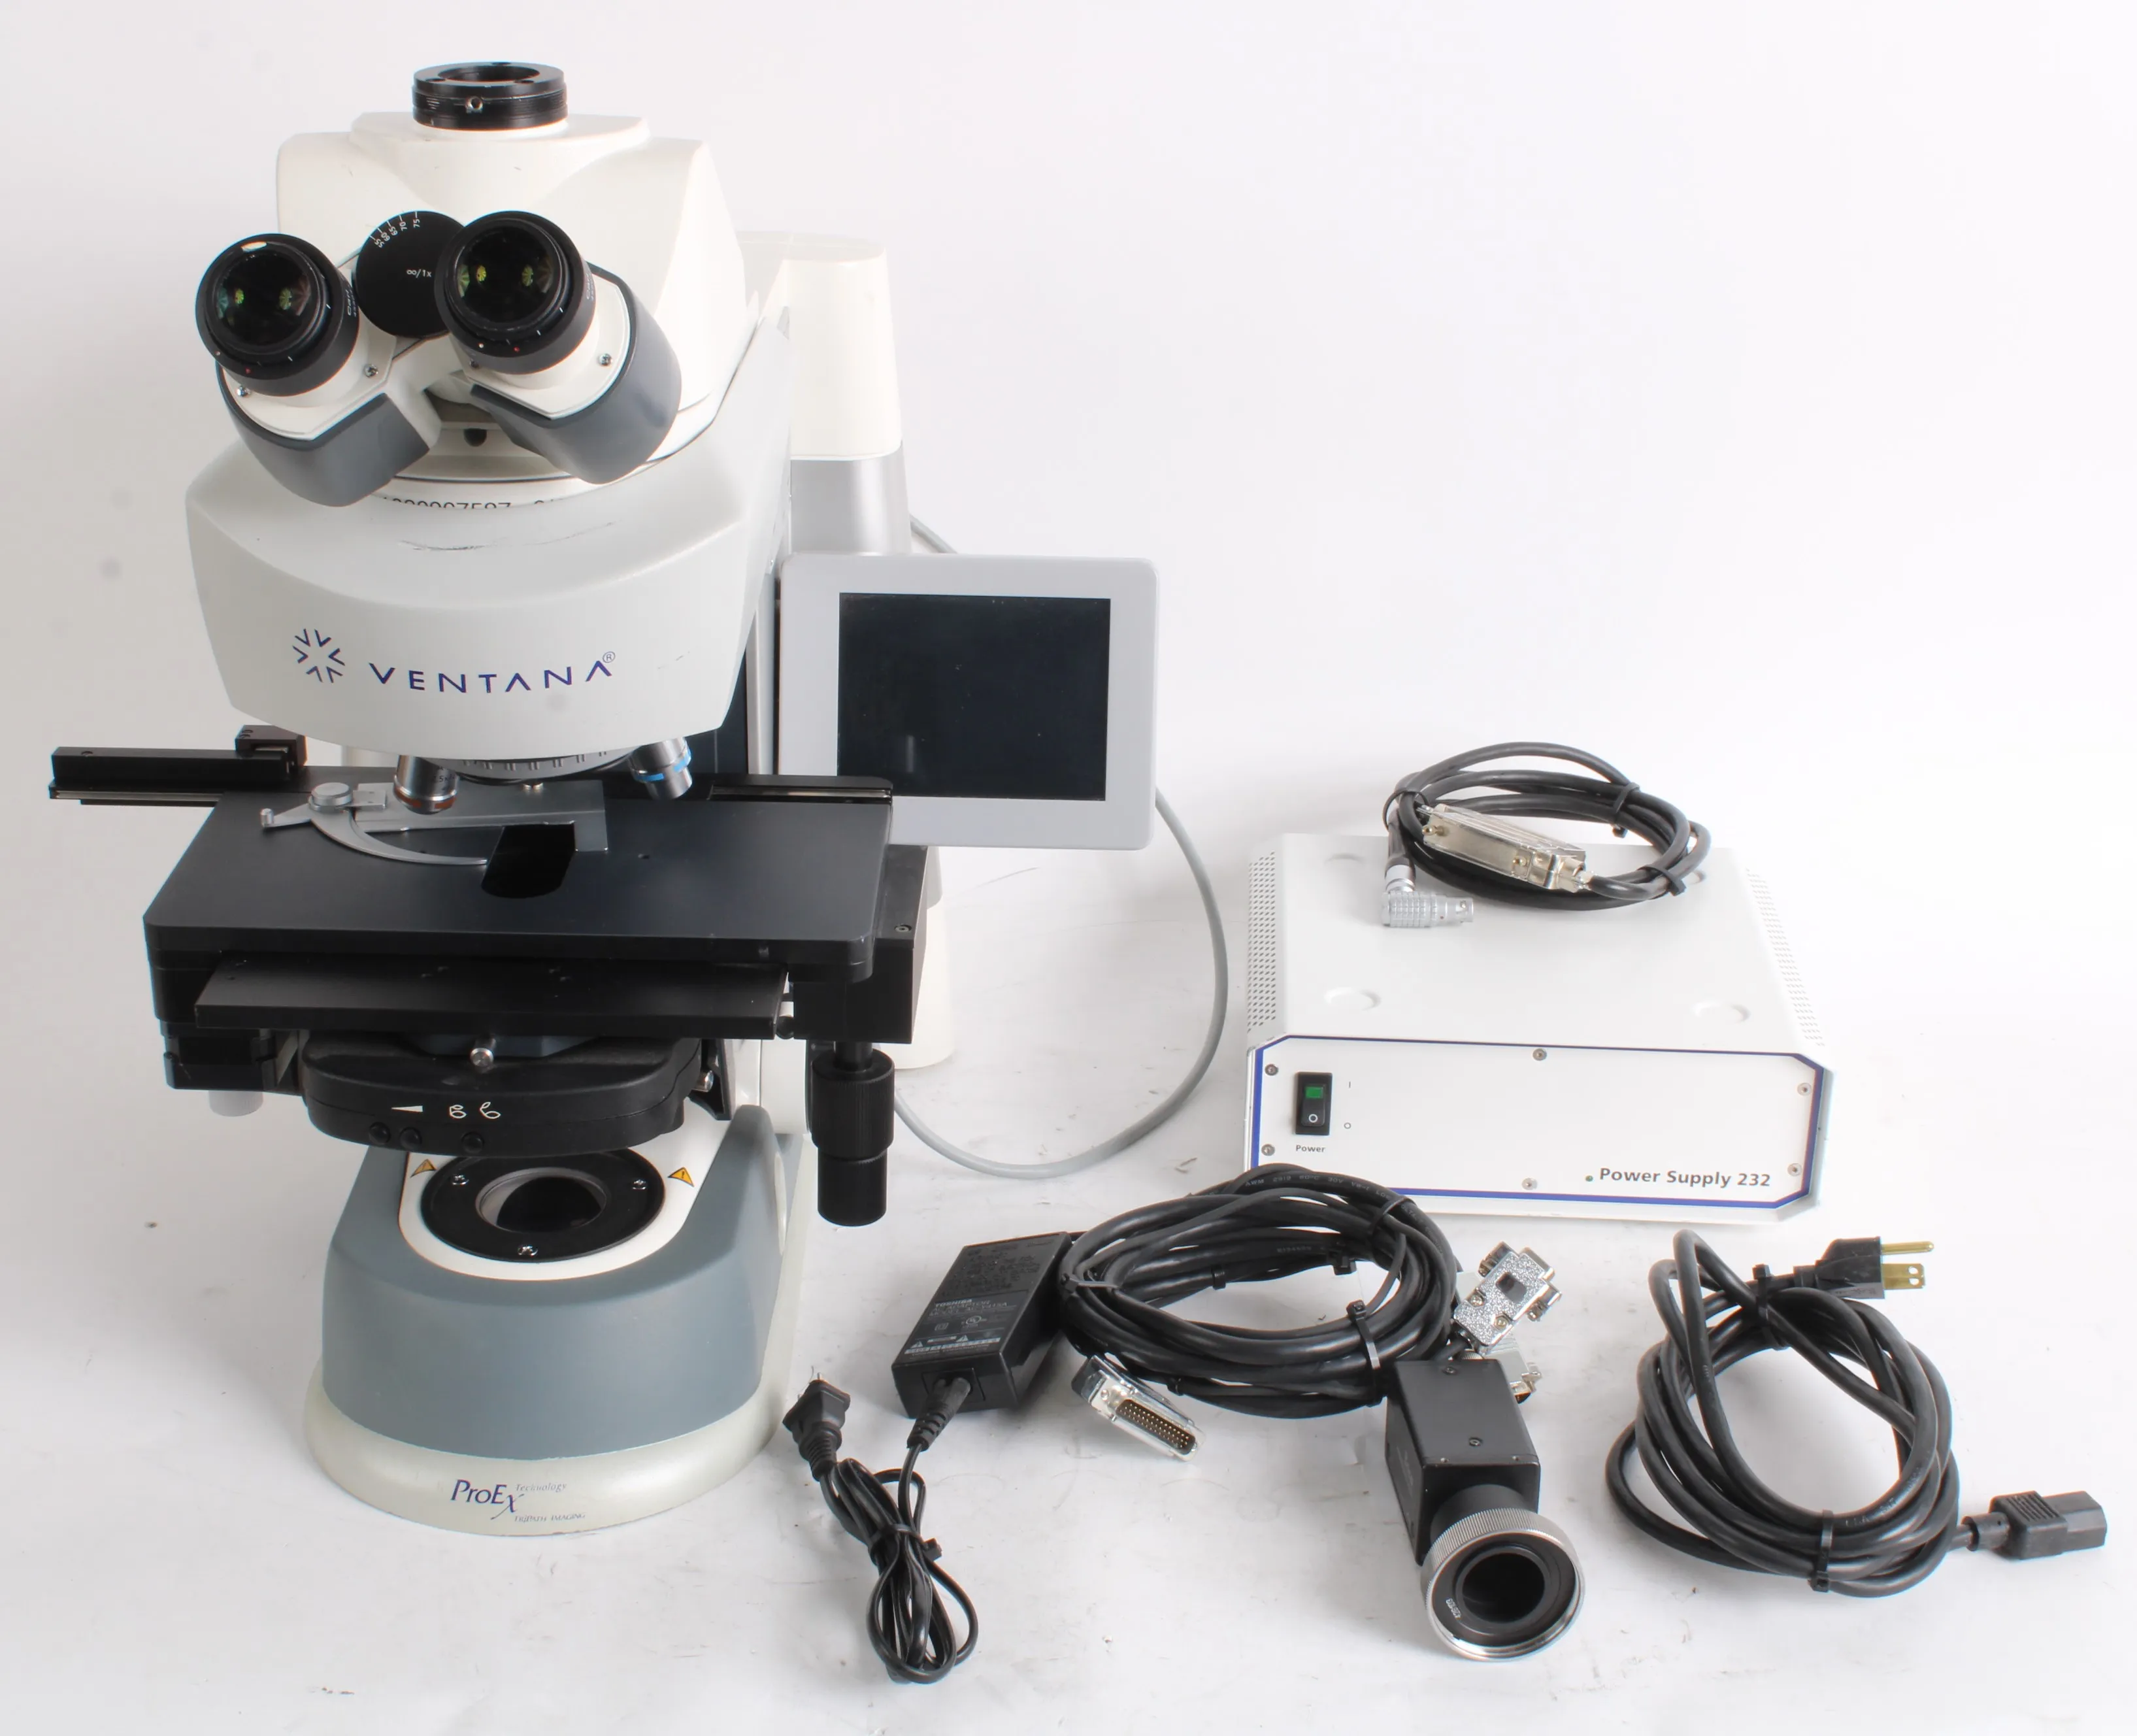 Zeiss Axio Imager M1 Motorized Fluorescence Microscope 430004-0000-711